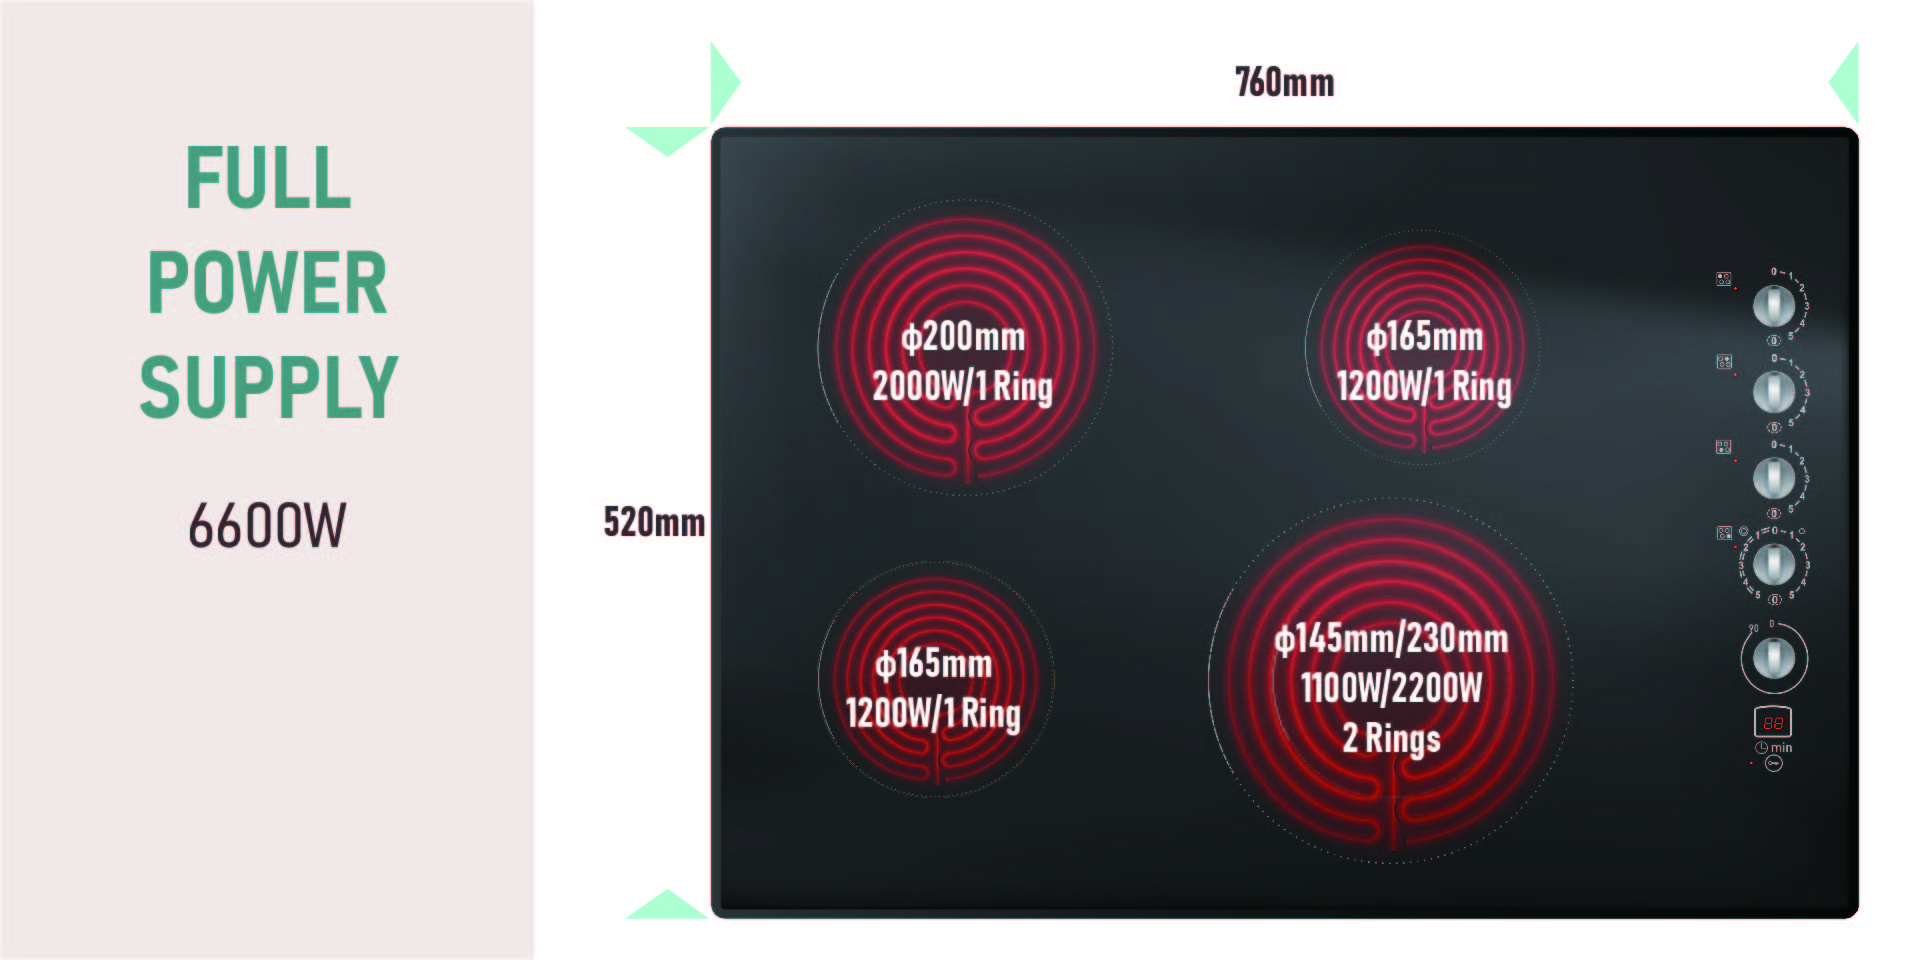 High Quality Side Control Black Ceramic Frameless Hob with 4 Hi-lite Cooking Zones Wholesale - Shenzhen H-one